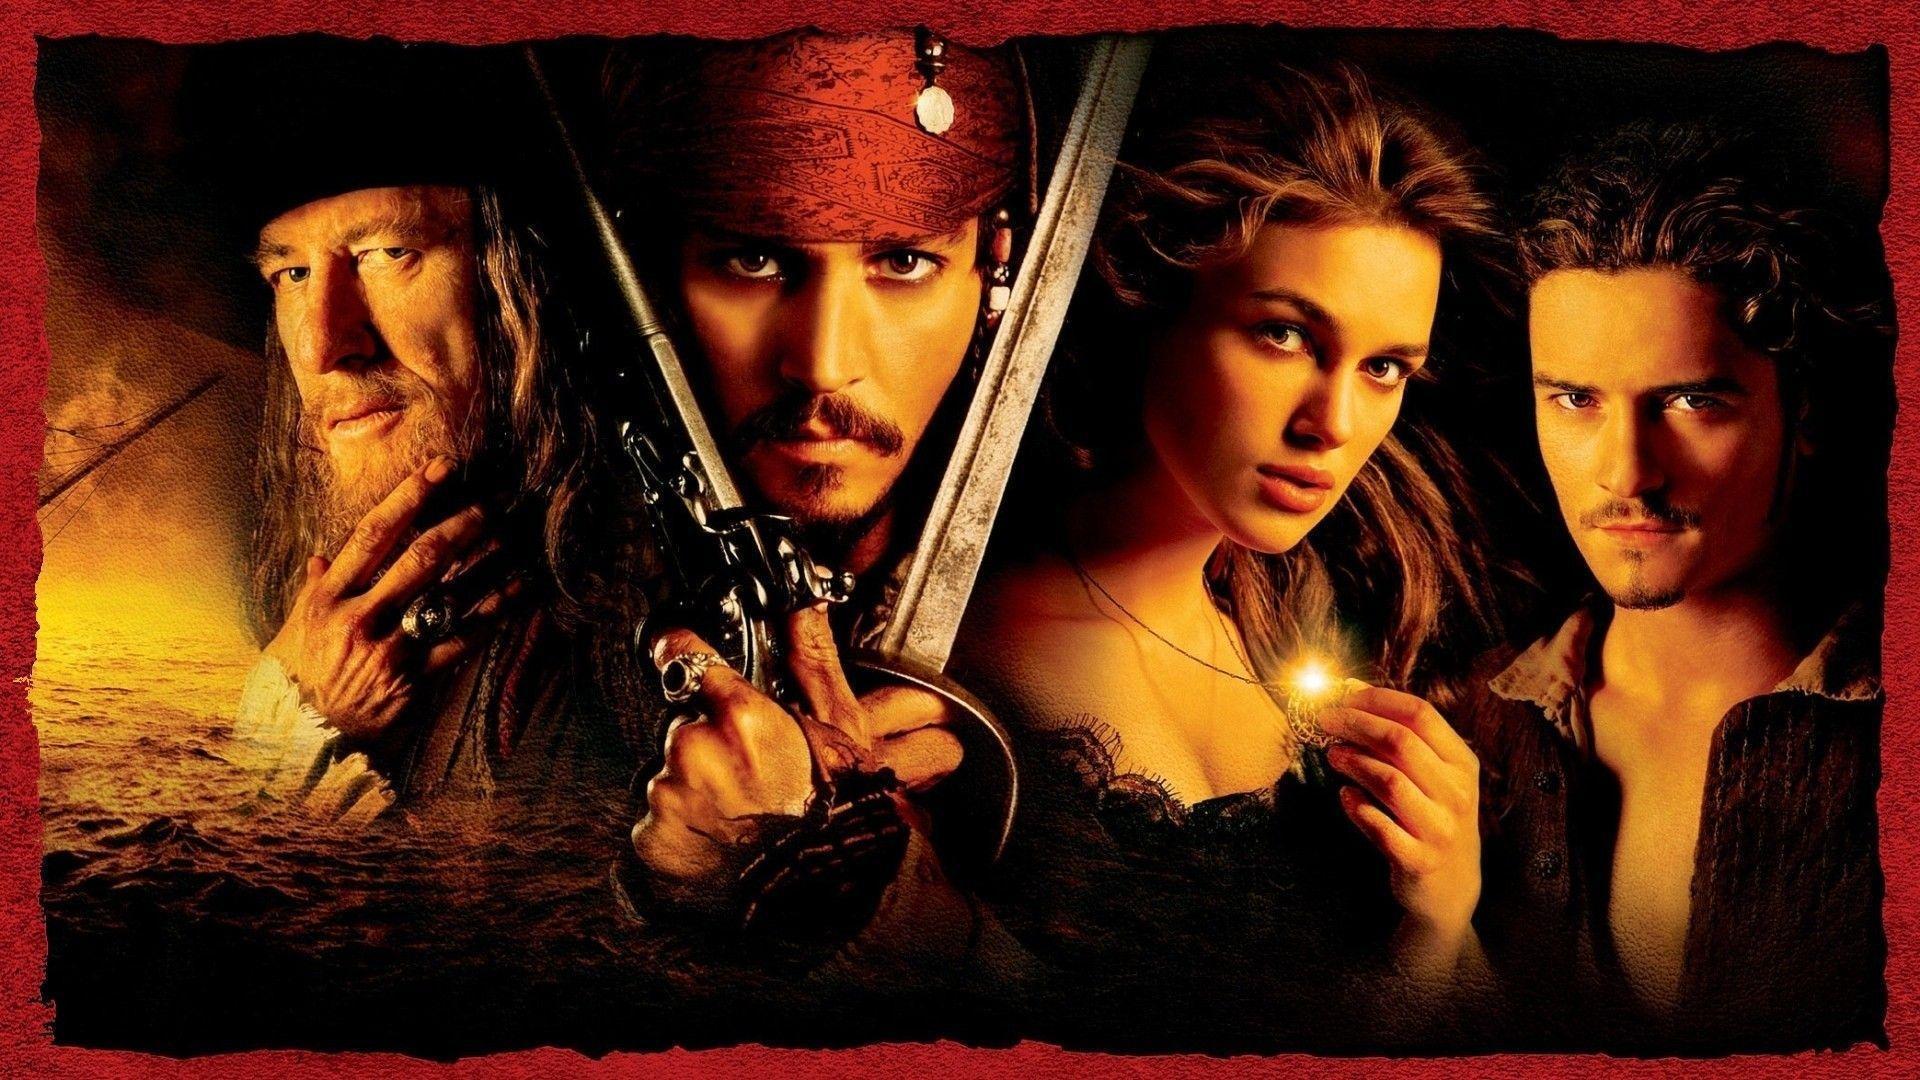 Pirates Of The Carribean Wallpaper